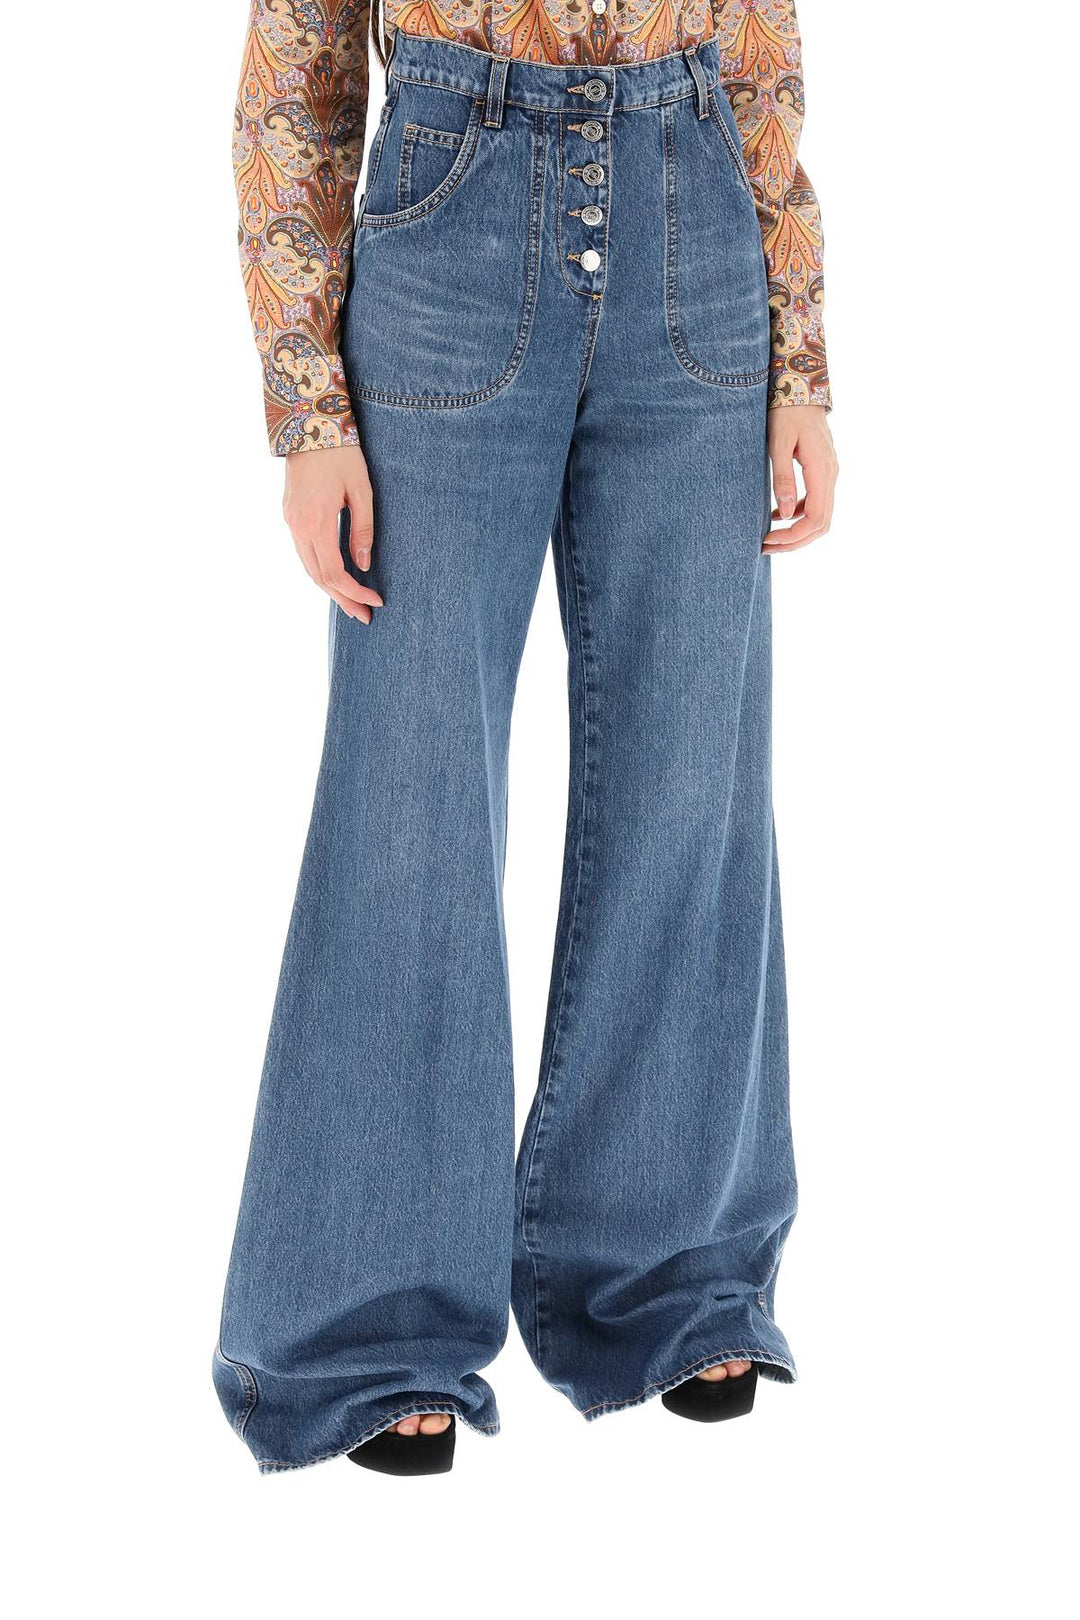 Etro Jeans With Back Foliage Embroidery   Celeste